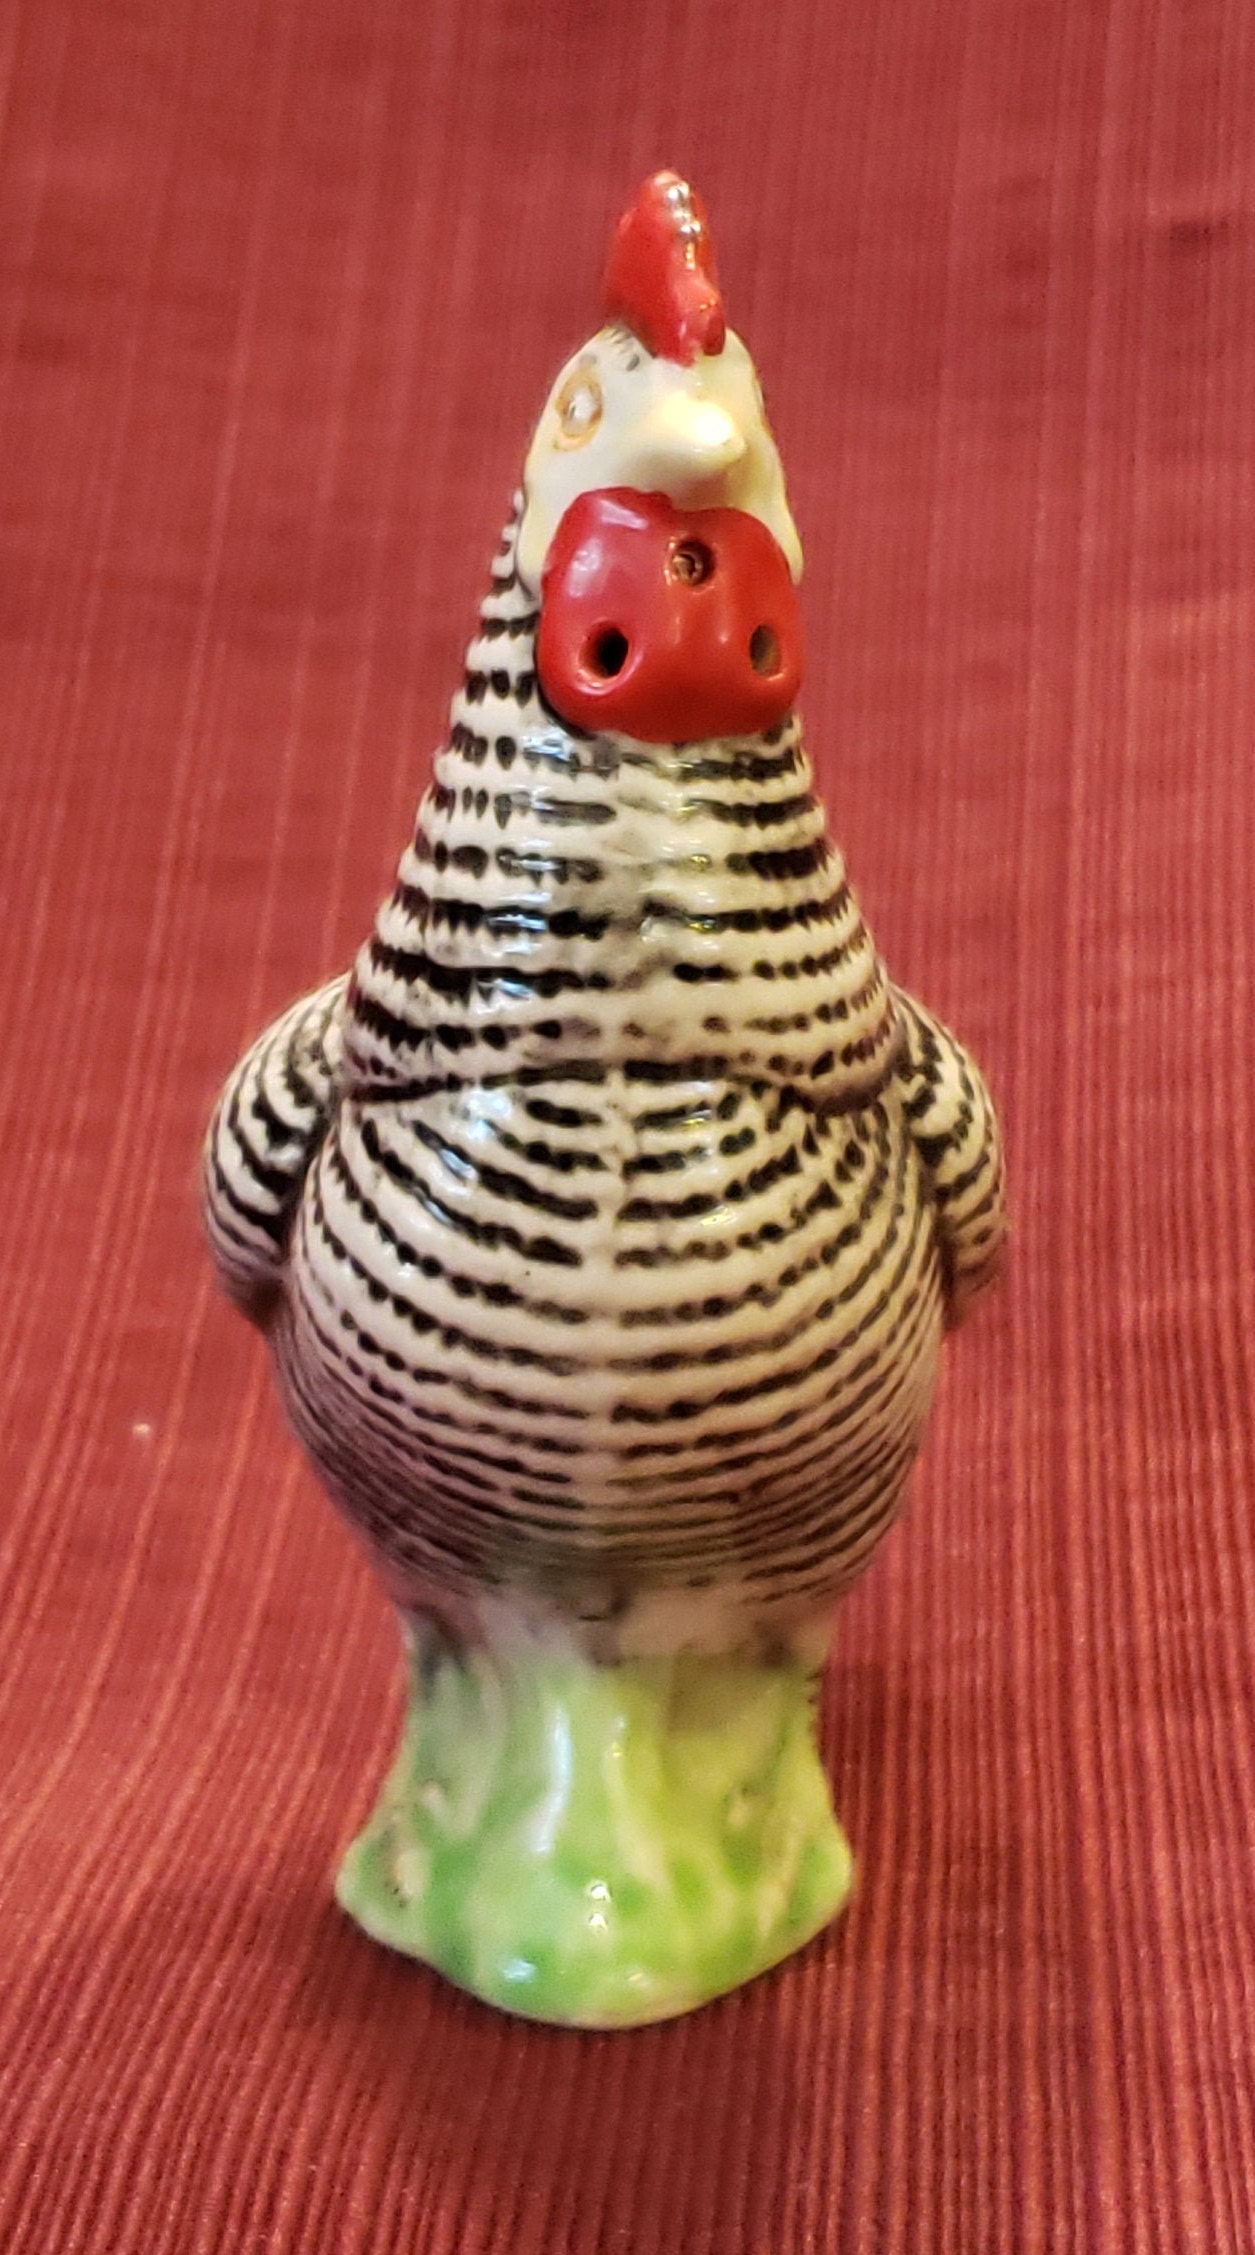 Mini Country Rooster and Hen Ceramic Salt and Pepper Shakers, Set of 4 -  Tableware - Appletree Design